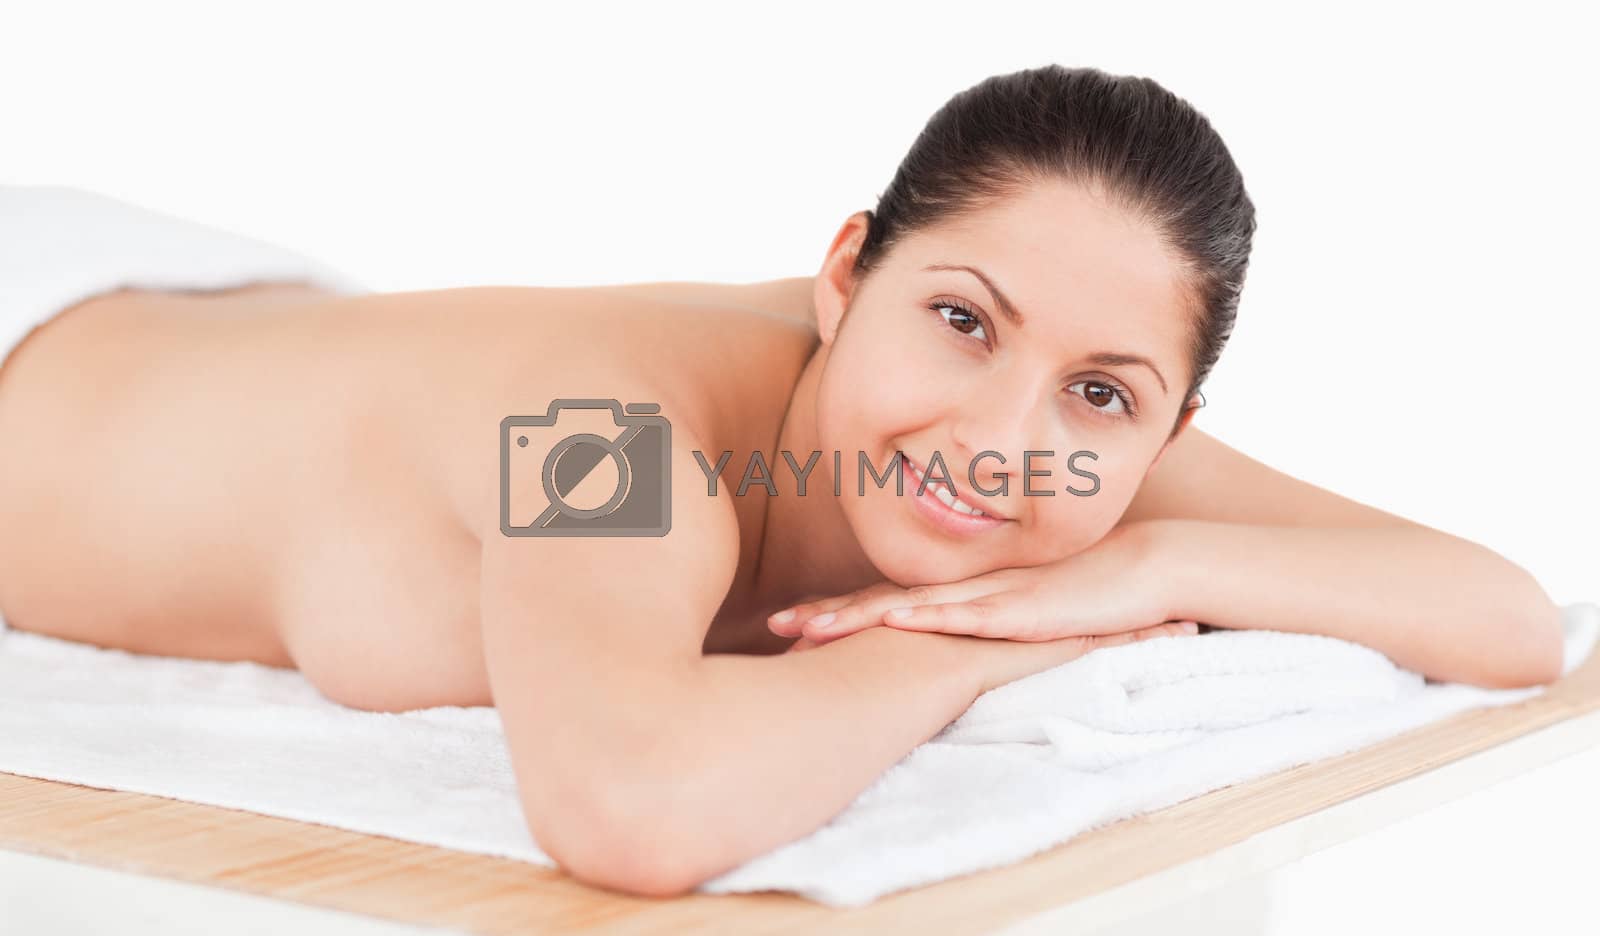 Royalty free image of brunette on a massage table by Wavebreakmedia